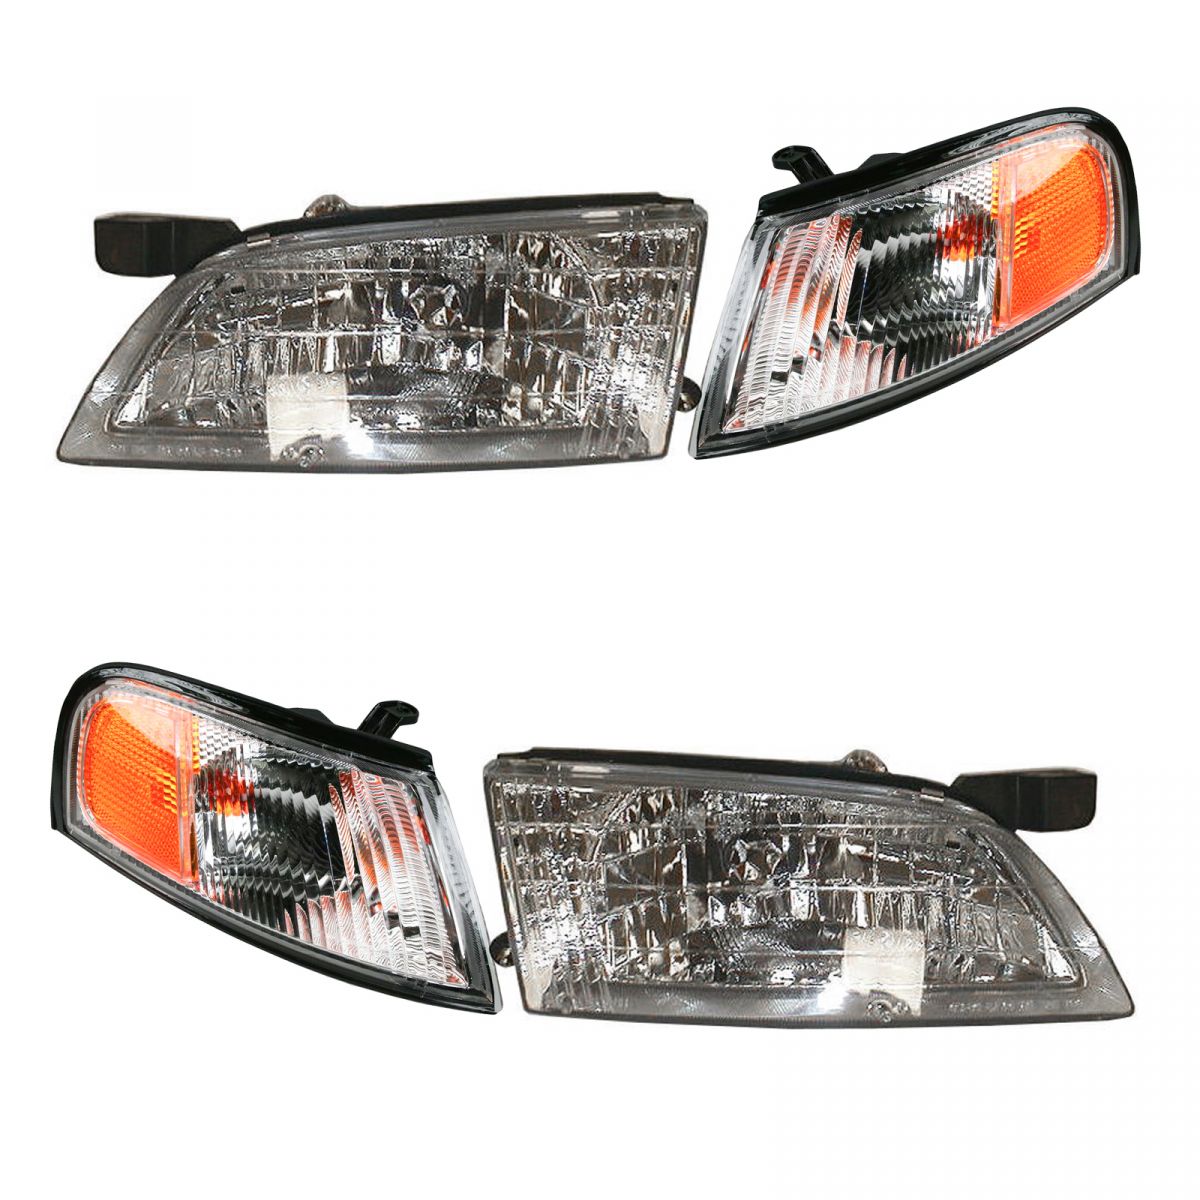 REPLACEMENT HEAD LIGHTS LAMPS BLACK AMBER SIGNAL VIP PAIRS FOR 02-04 ALTIMA 4DR